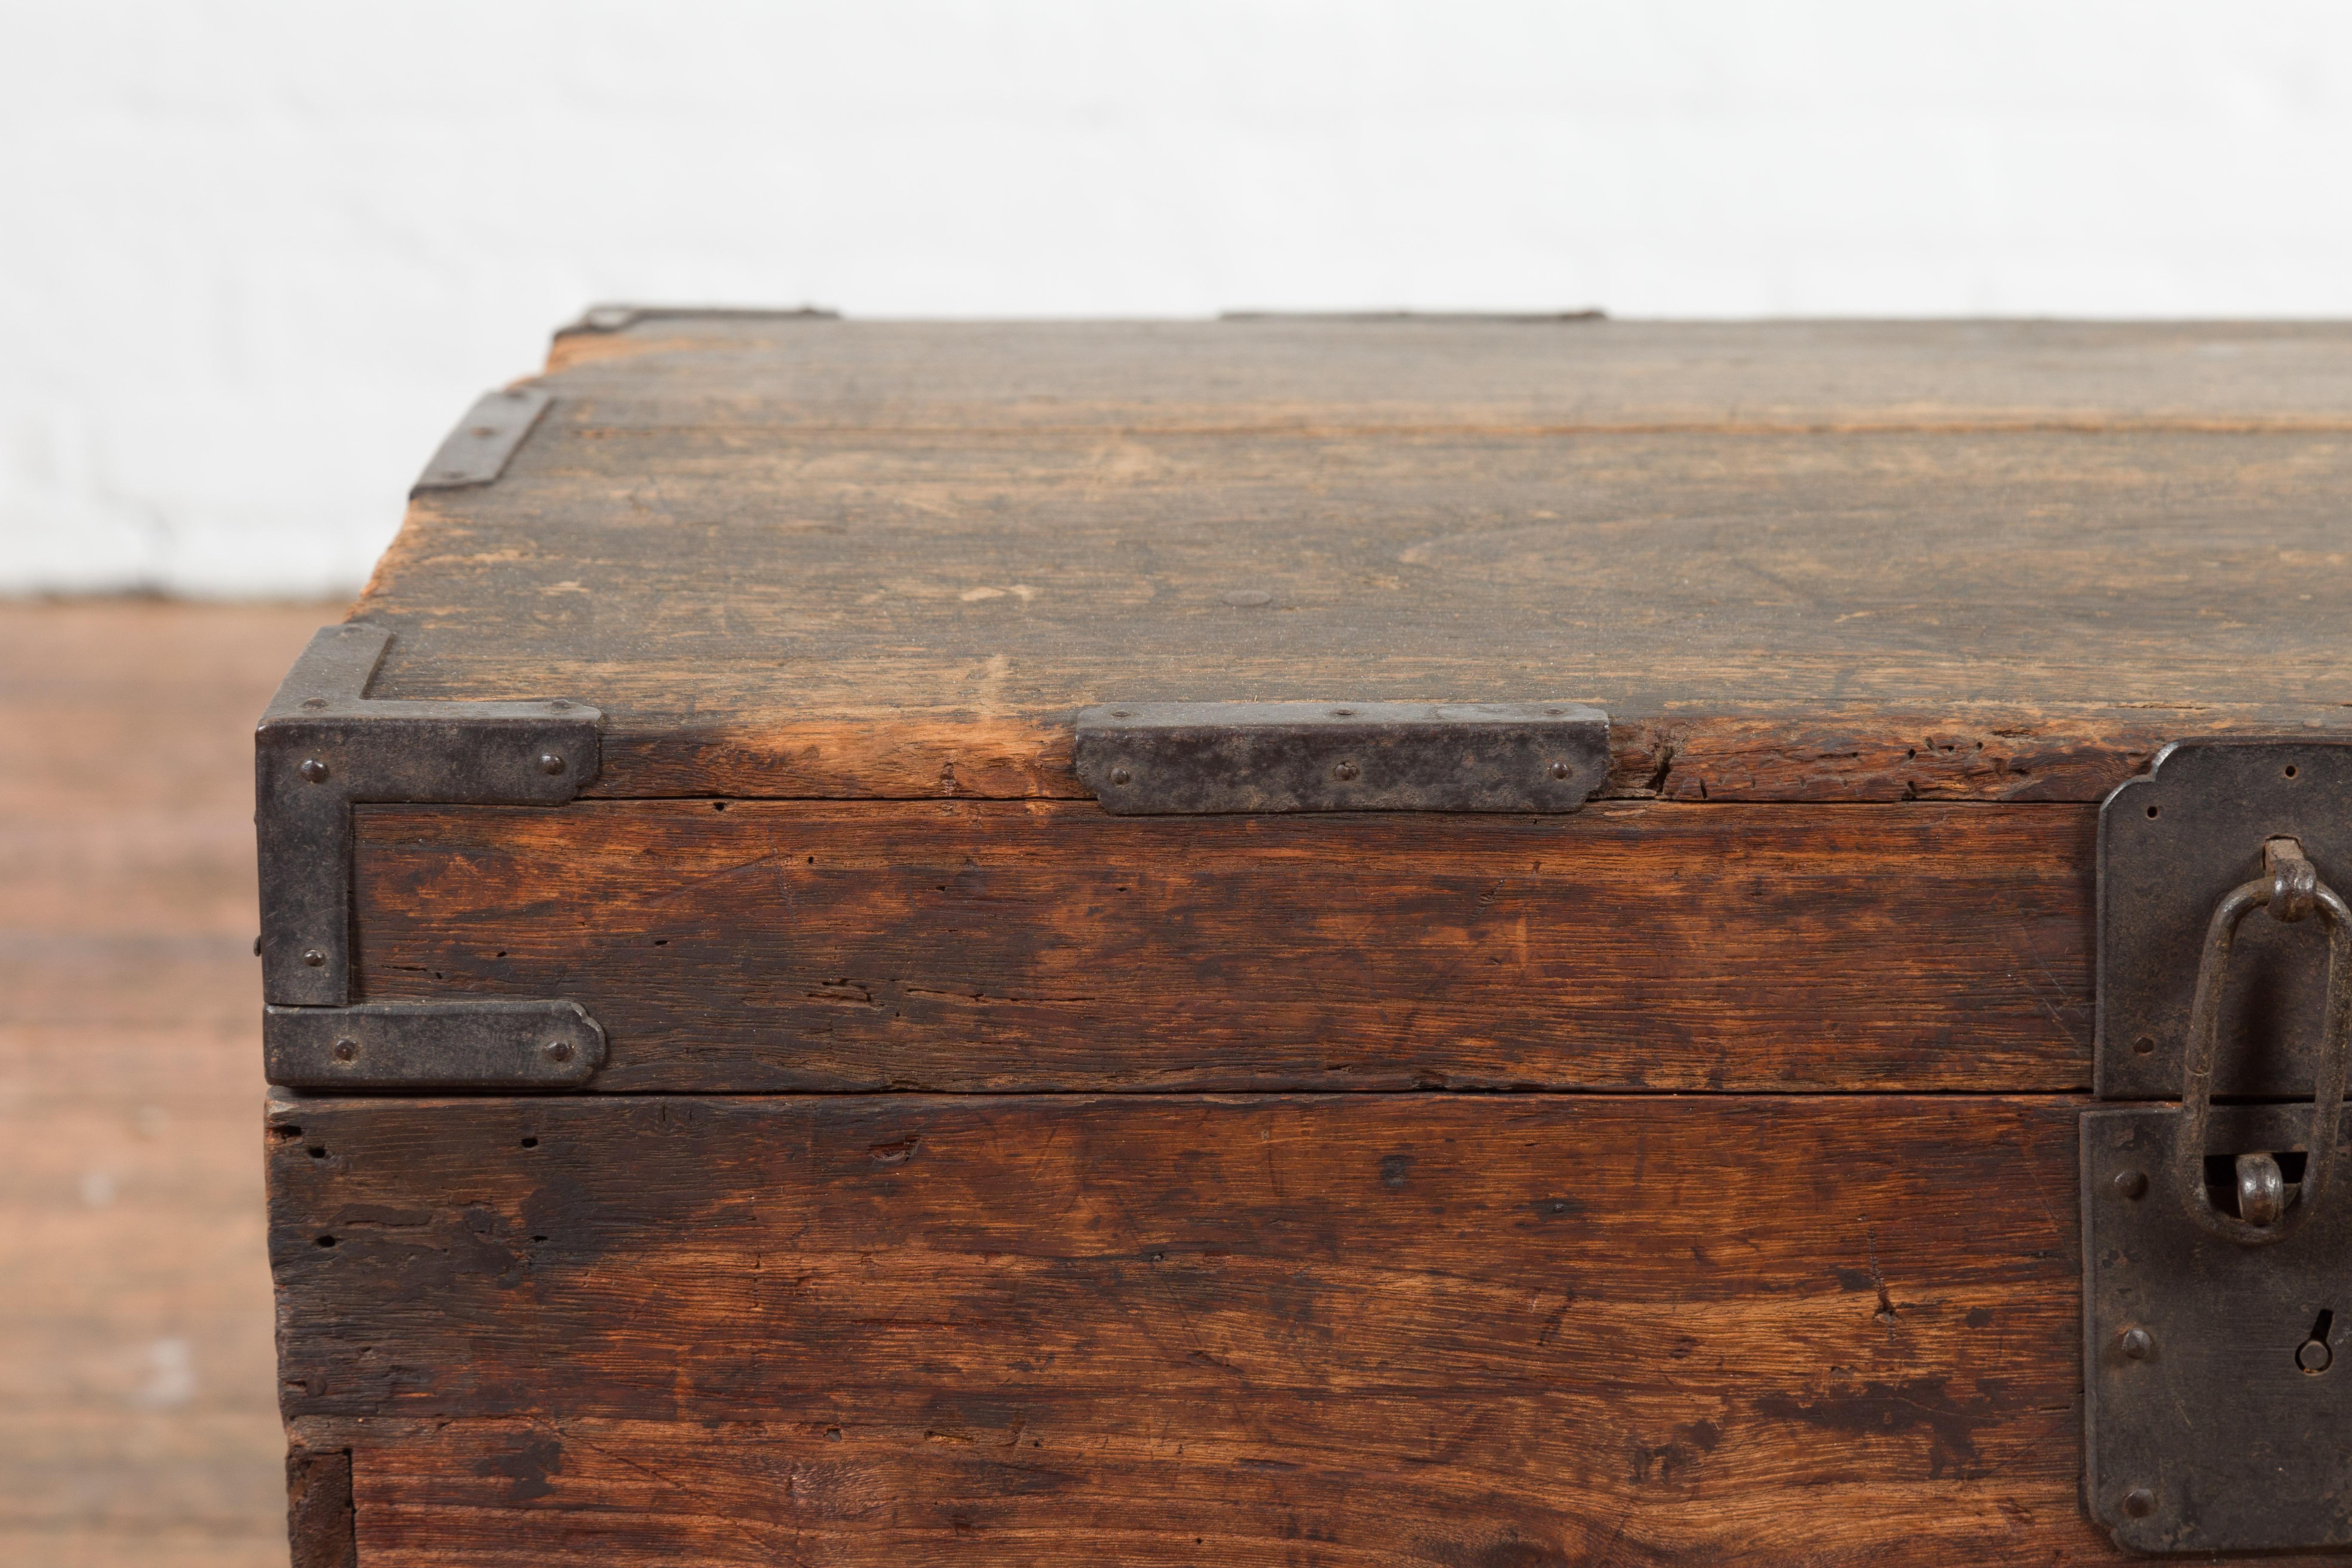 Japanese Meiji Period 19th Century Blanket Chest with Iron Hardware and Patina For Sale 3